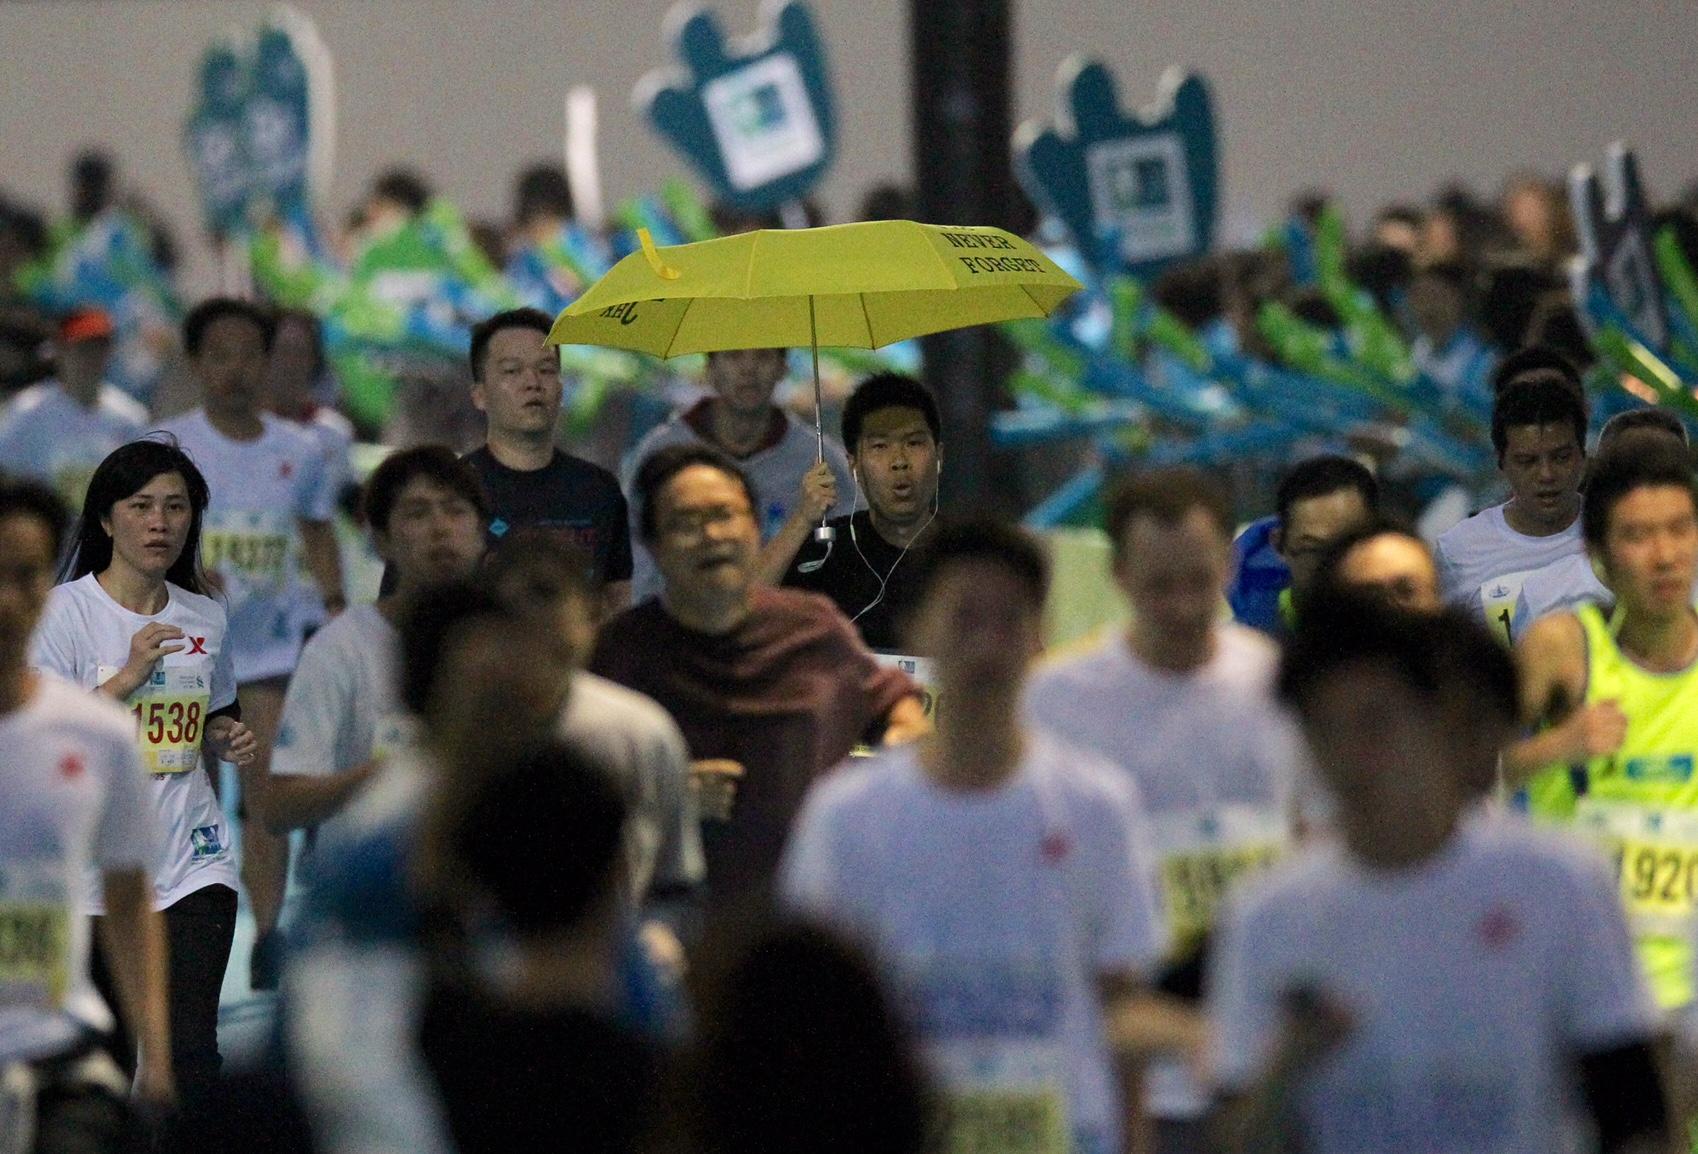 A competitor in the Standard Chartered Hong Kong Marathon shows his support for the Occupy Central democracy movement. Photos: Nora Tam